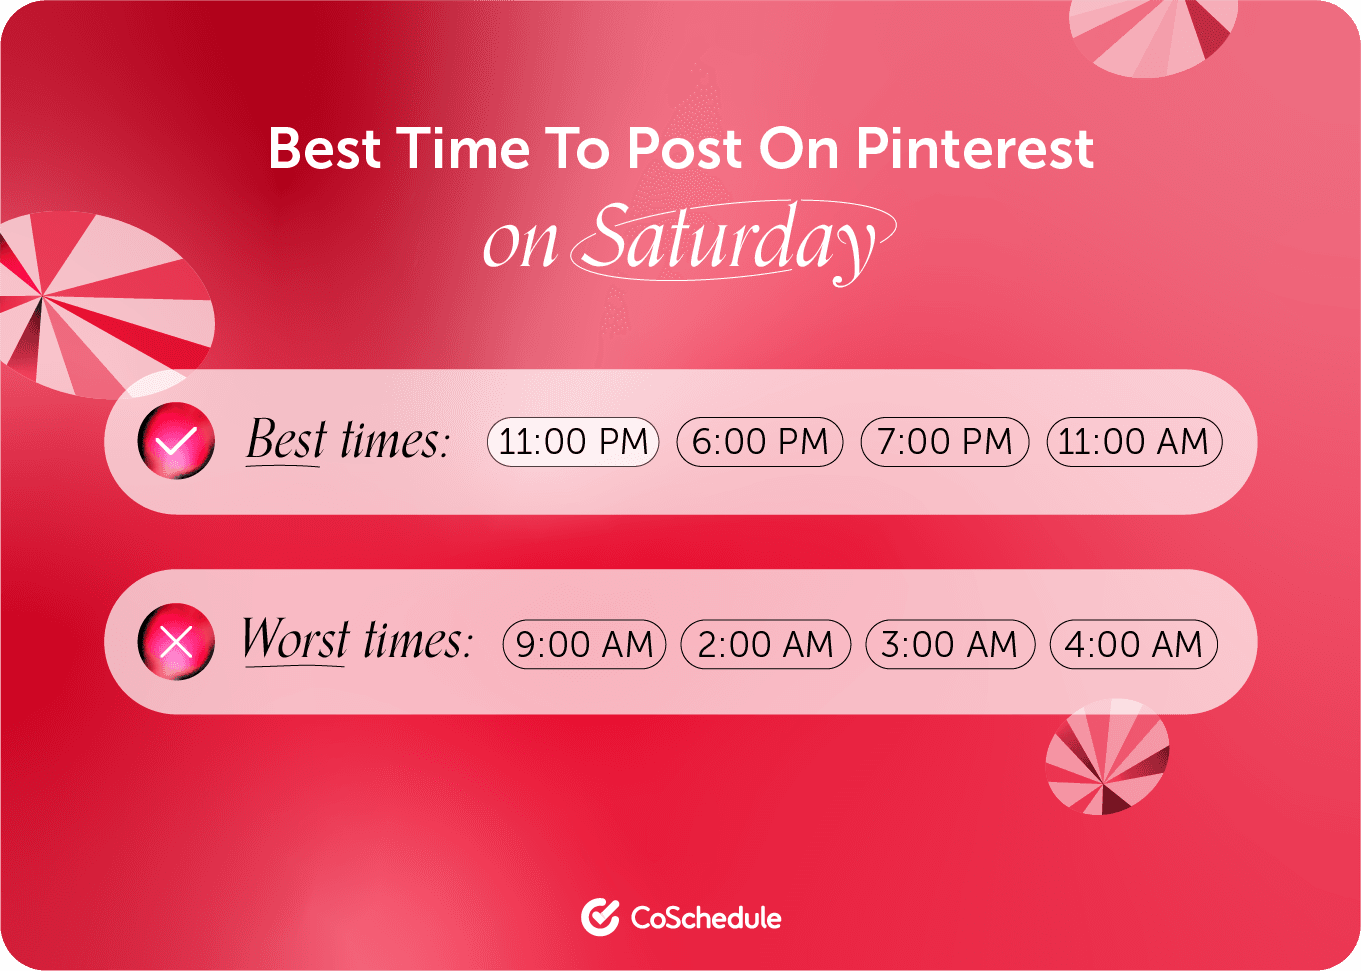 CoSchedule graphic on the best times to post on Pinterest Saturday